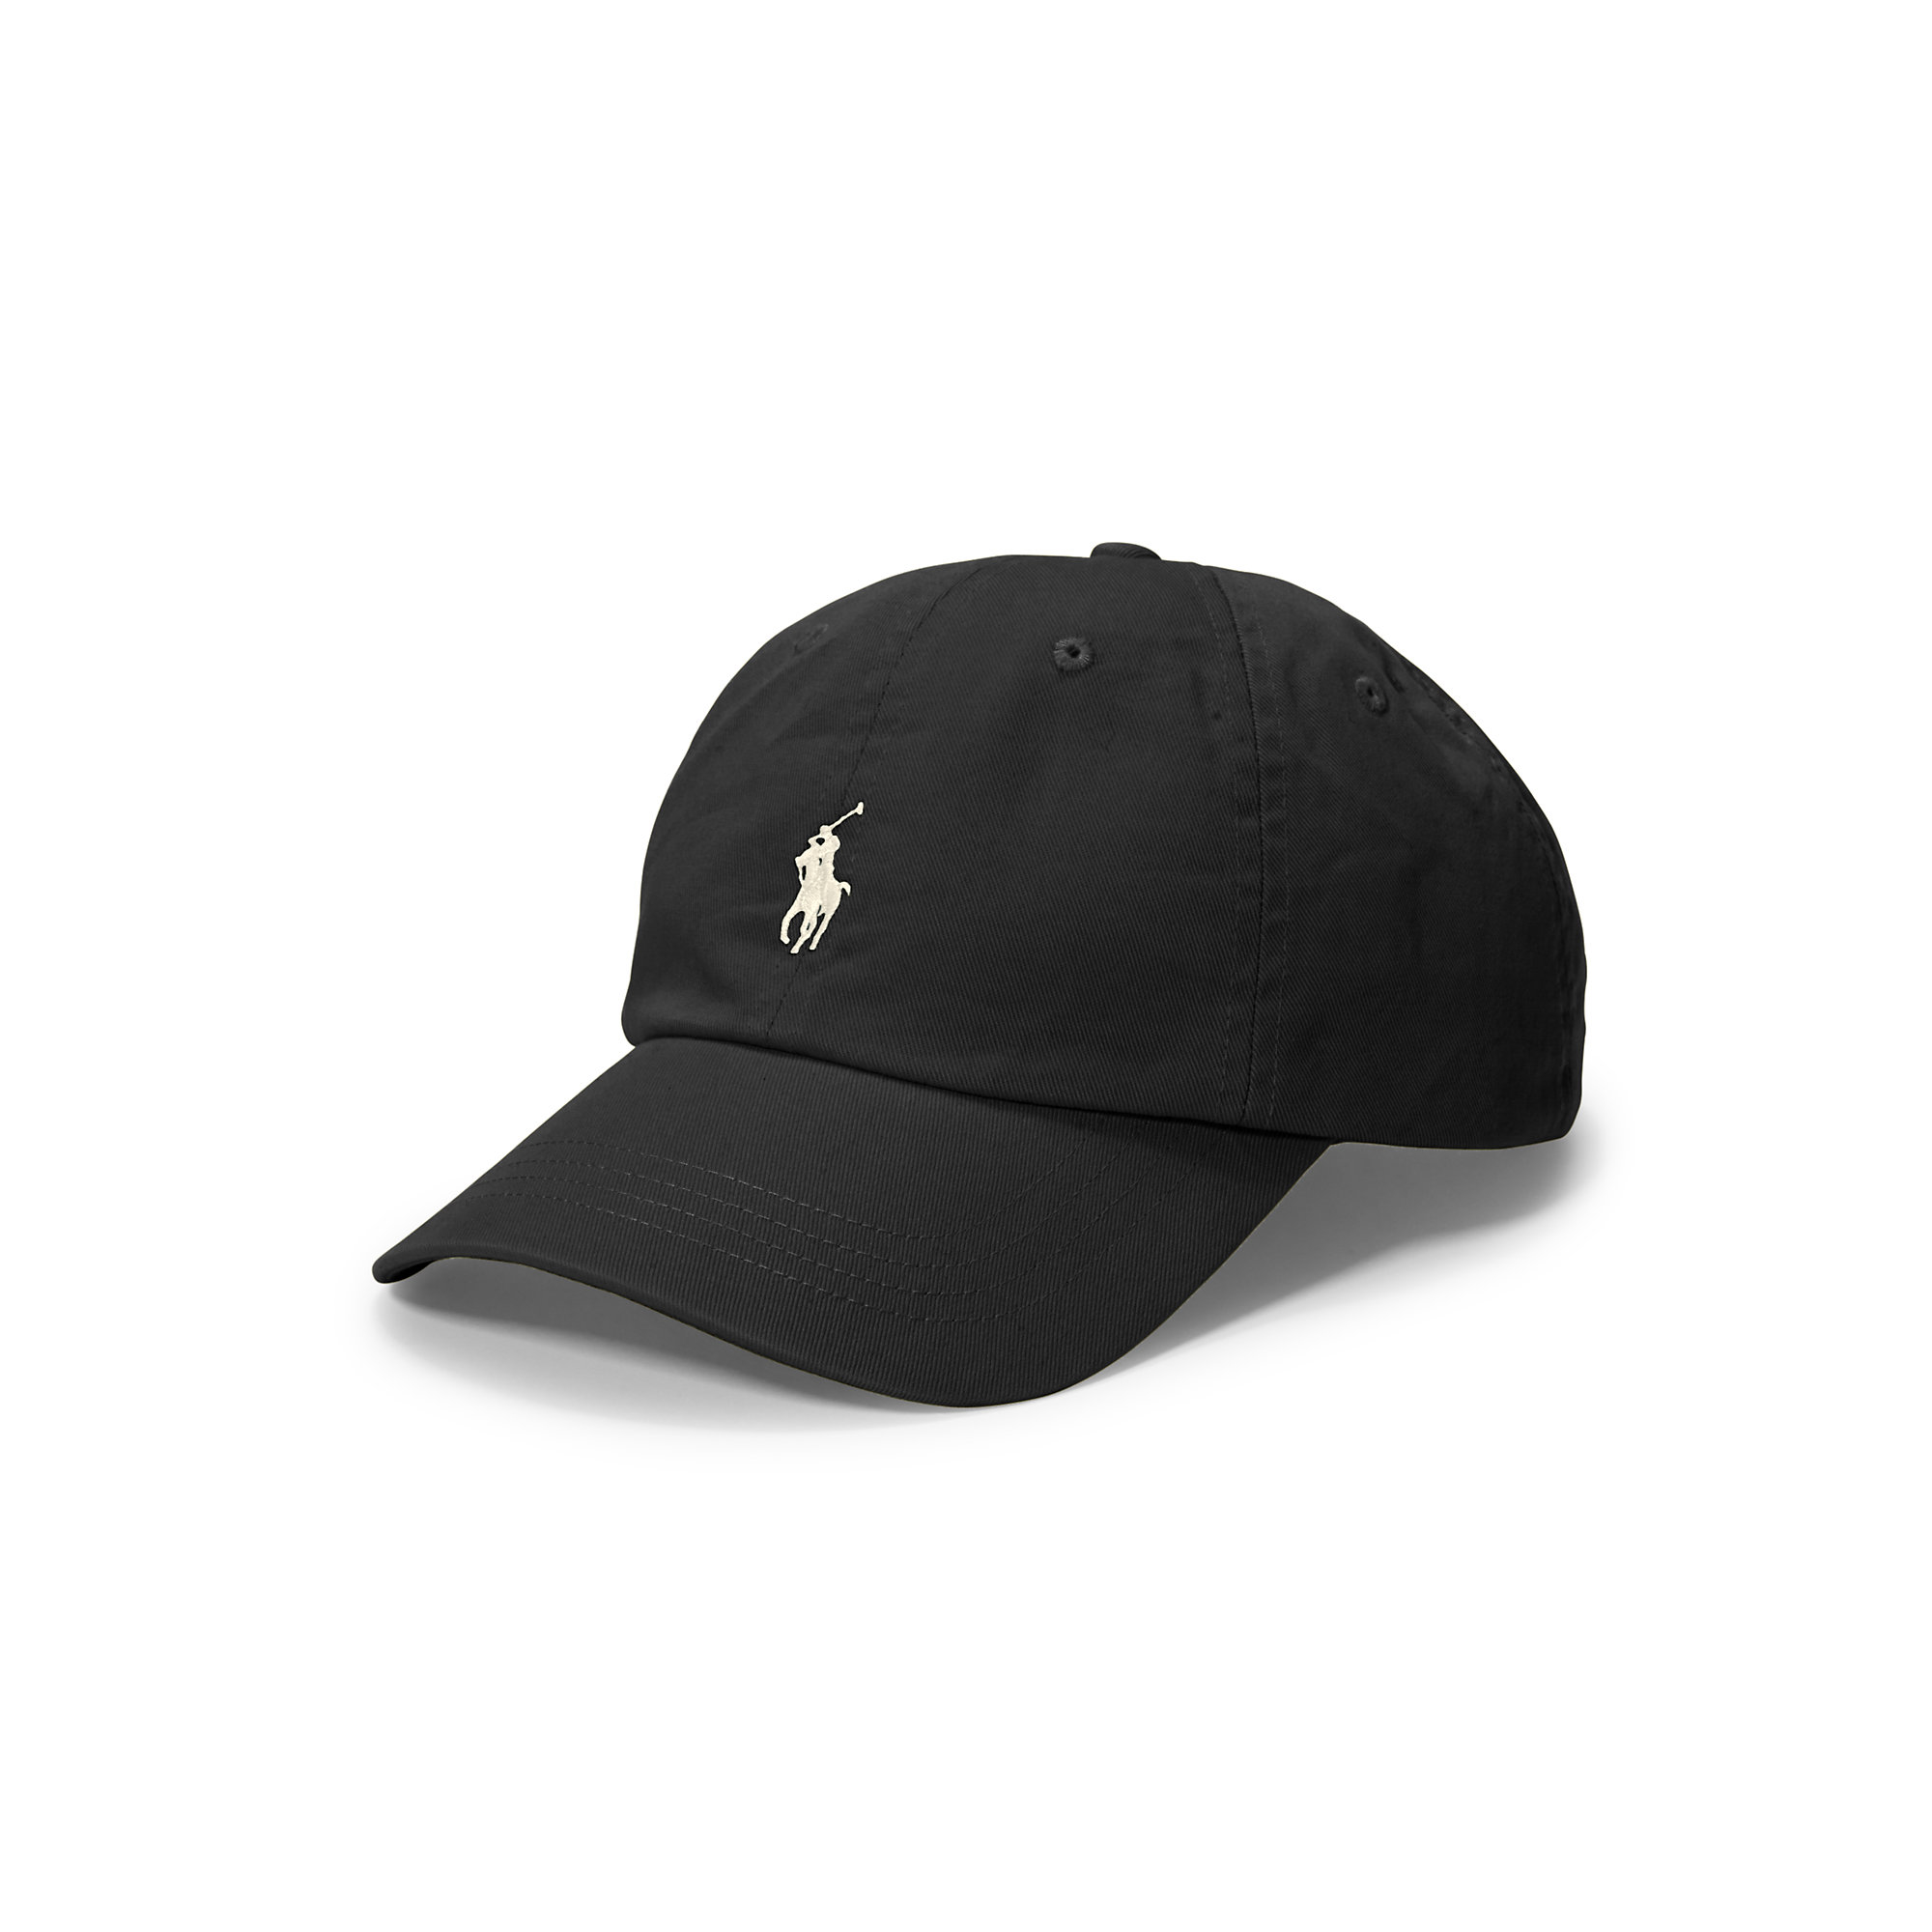 black and white polo hat